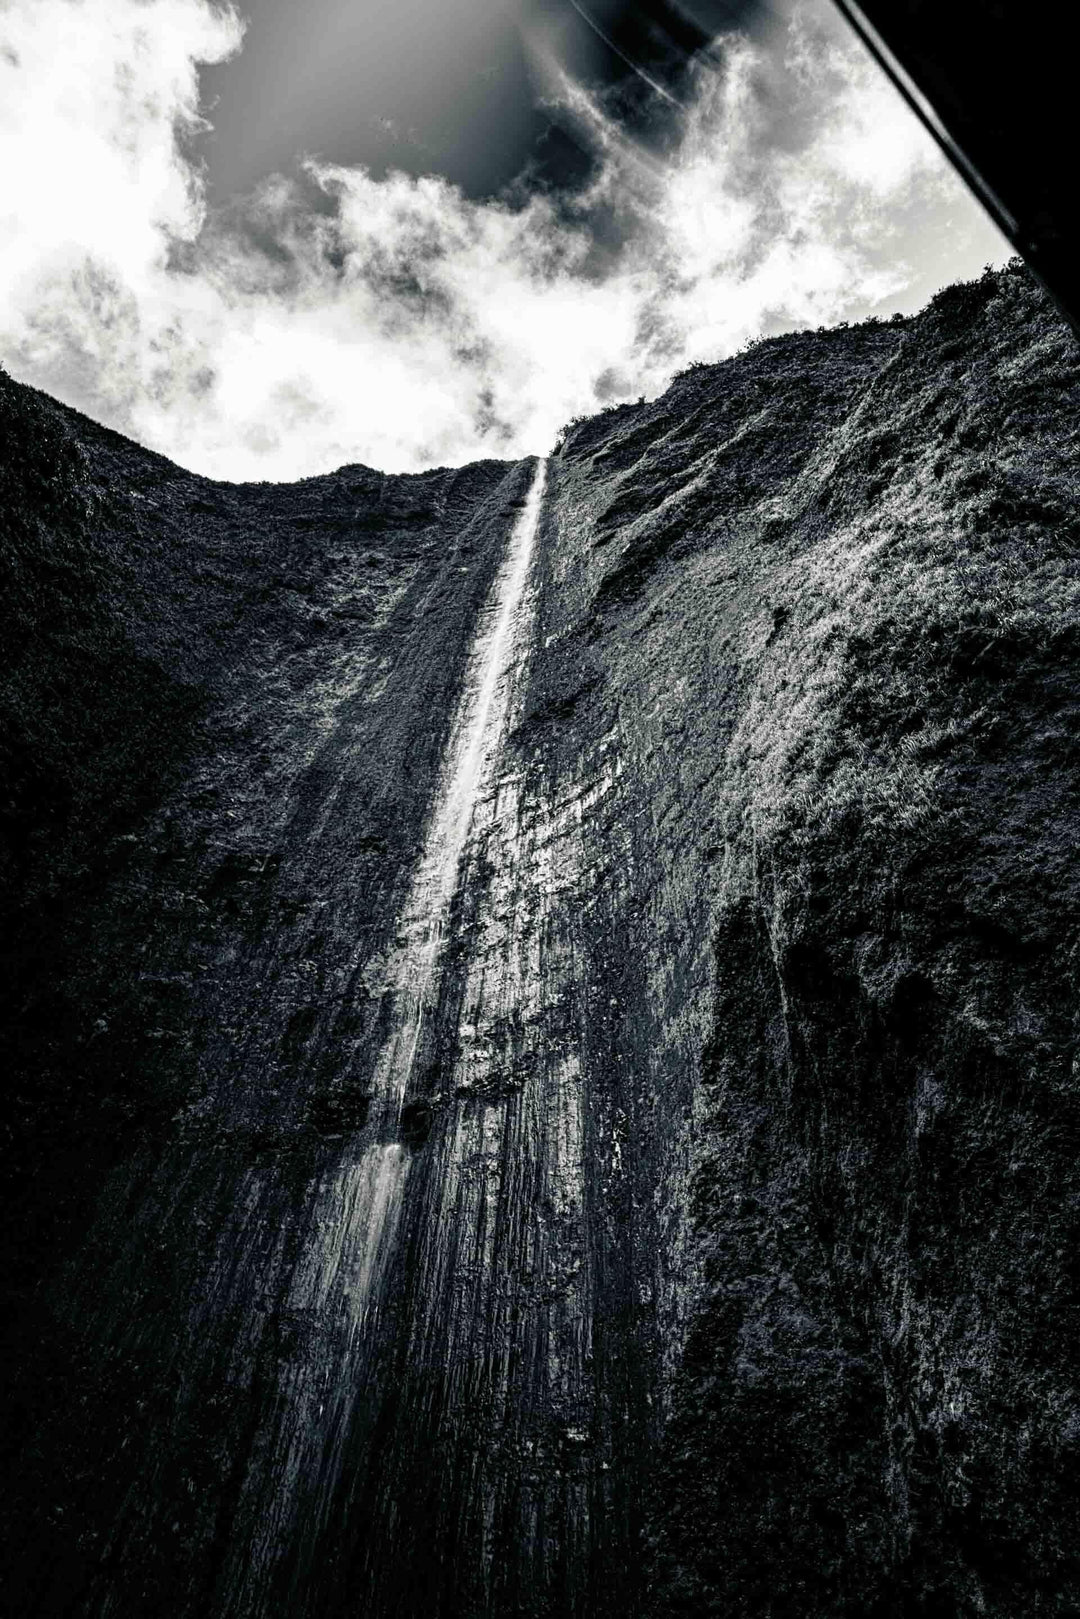 Skyward Spectacular | The Awe of Maui's Tallest Falls - Living Moments Media - Abstract, Acrylic, Artwork, Best Wall Artwork, Black & White, Canvas, Hawaii, Helicopter, Island, maui, Maui Hawaii Fine Art Photography, Maui Hawaii Wall Art, Metal, Moody, Mountains, new arrivals, New Moments, open-edition, Prints, rocks, size-16-x-24, size-24-x-36, size-40-x-60, vertical, Visual Artwork, Water, Waterfalls, White